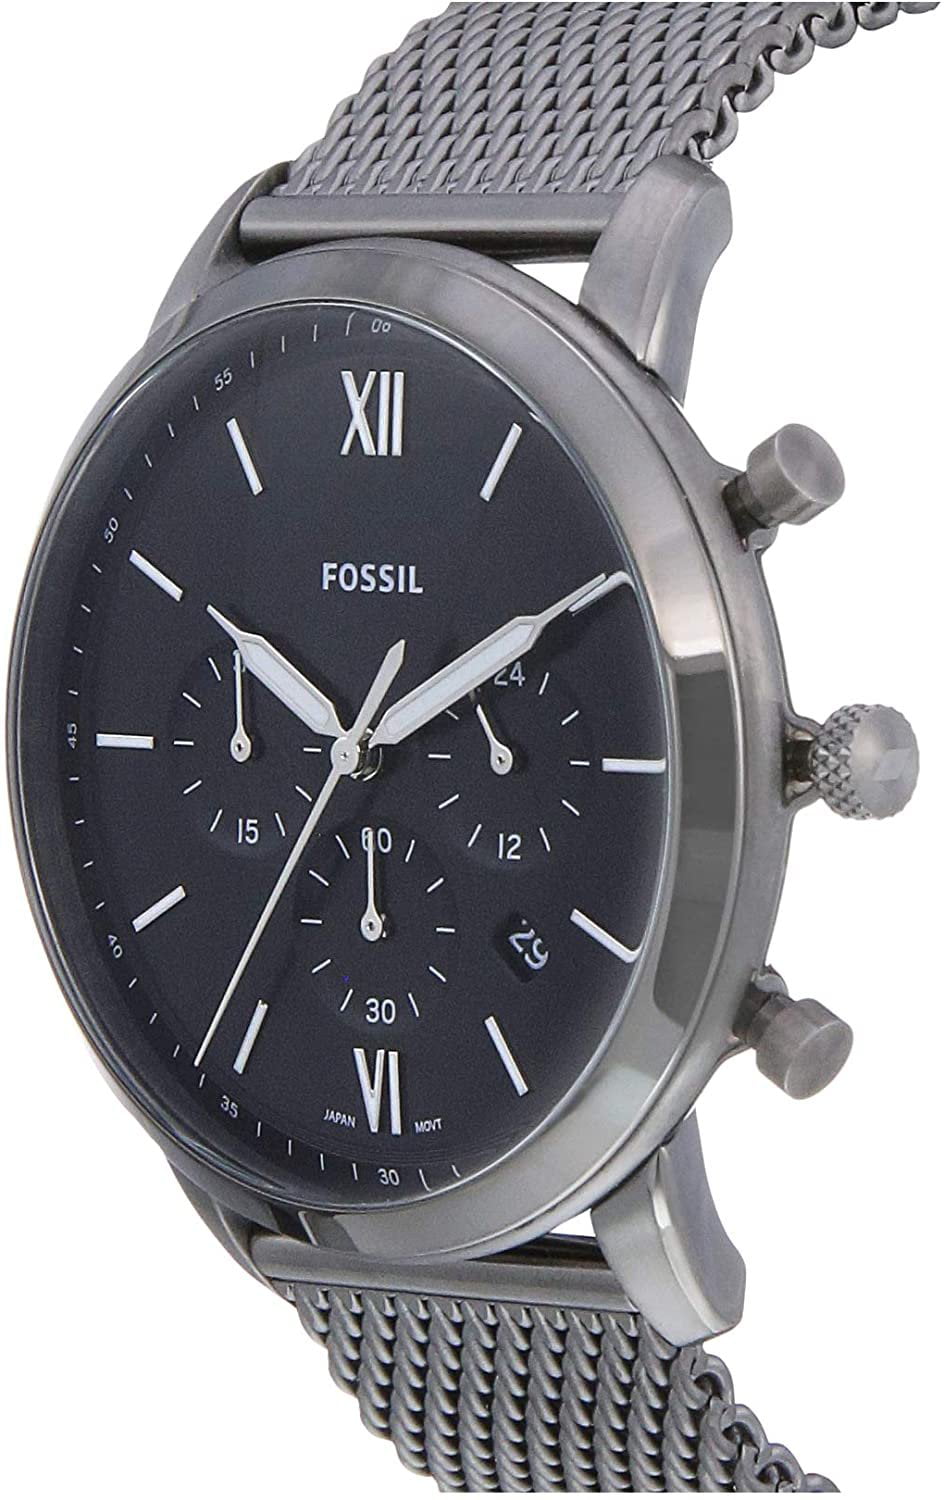 Fossil Men\'s Neutra Chronograph, Stainless Steel Watch, FS5380